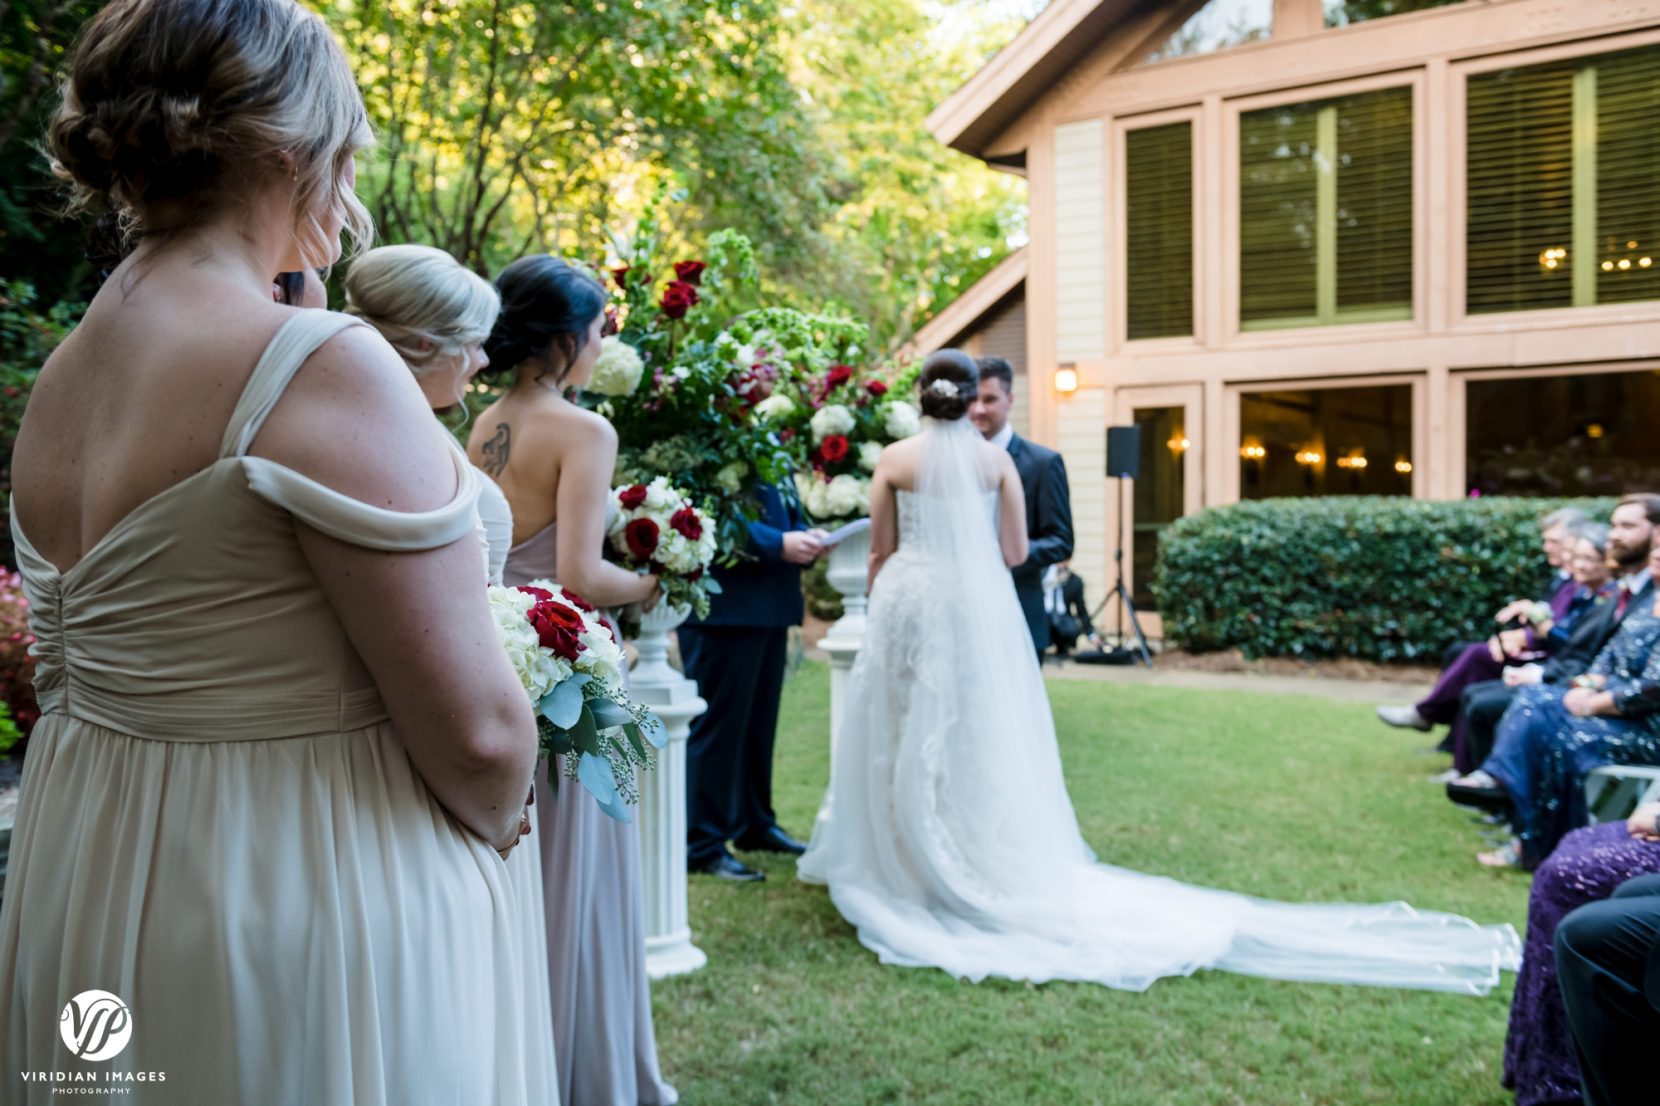 wedding ceremony from bridesmaids perspective